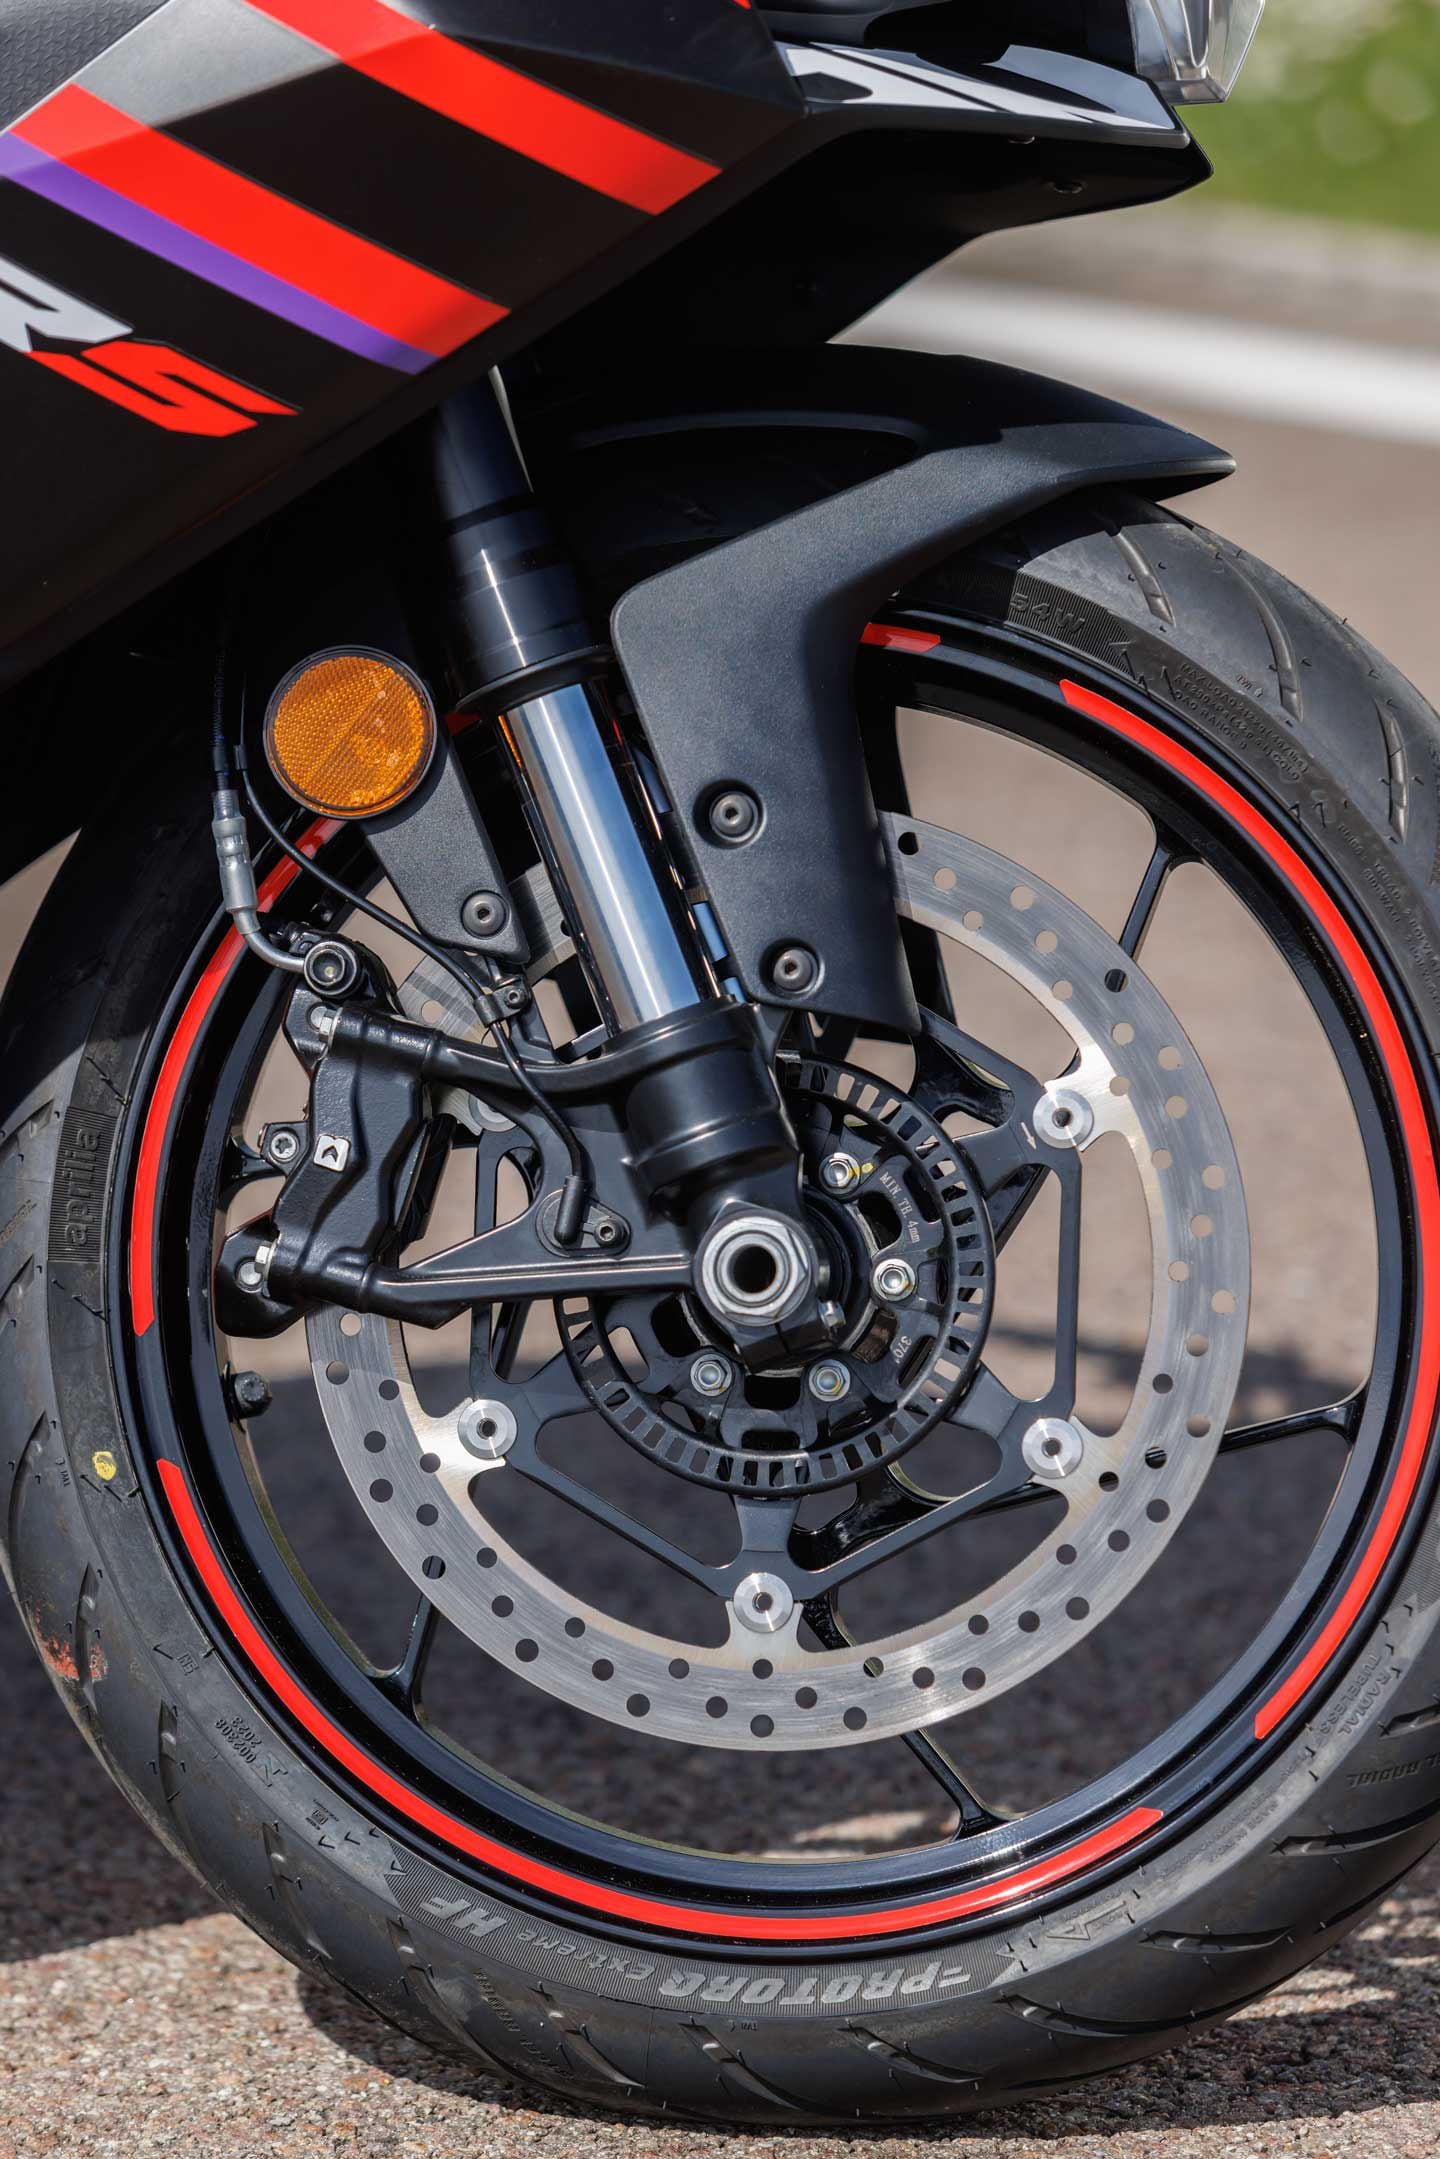 The Aprilia RS 457′s front end utilizes a 41mm inverted fork and a 320mm disc with a four-piston ByBre caliper.